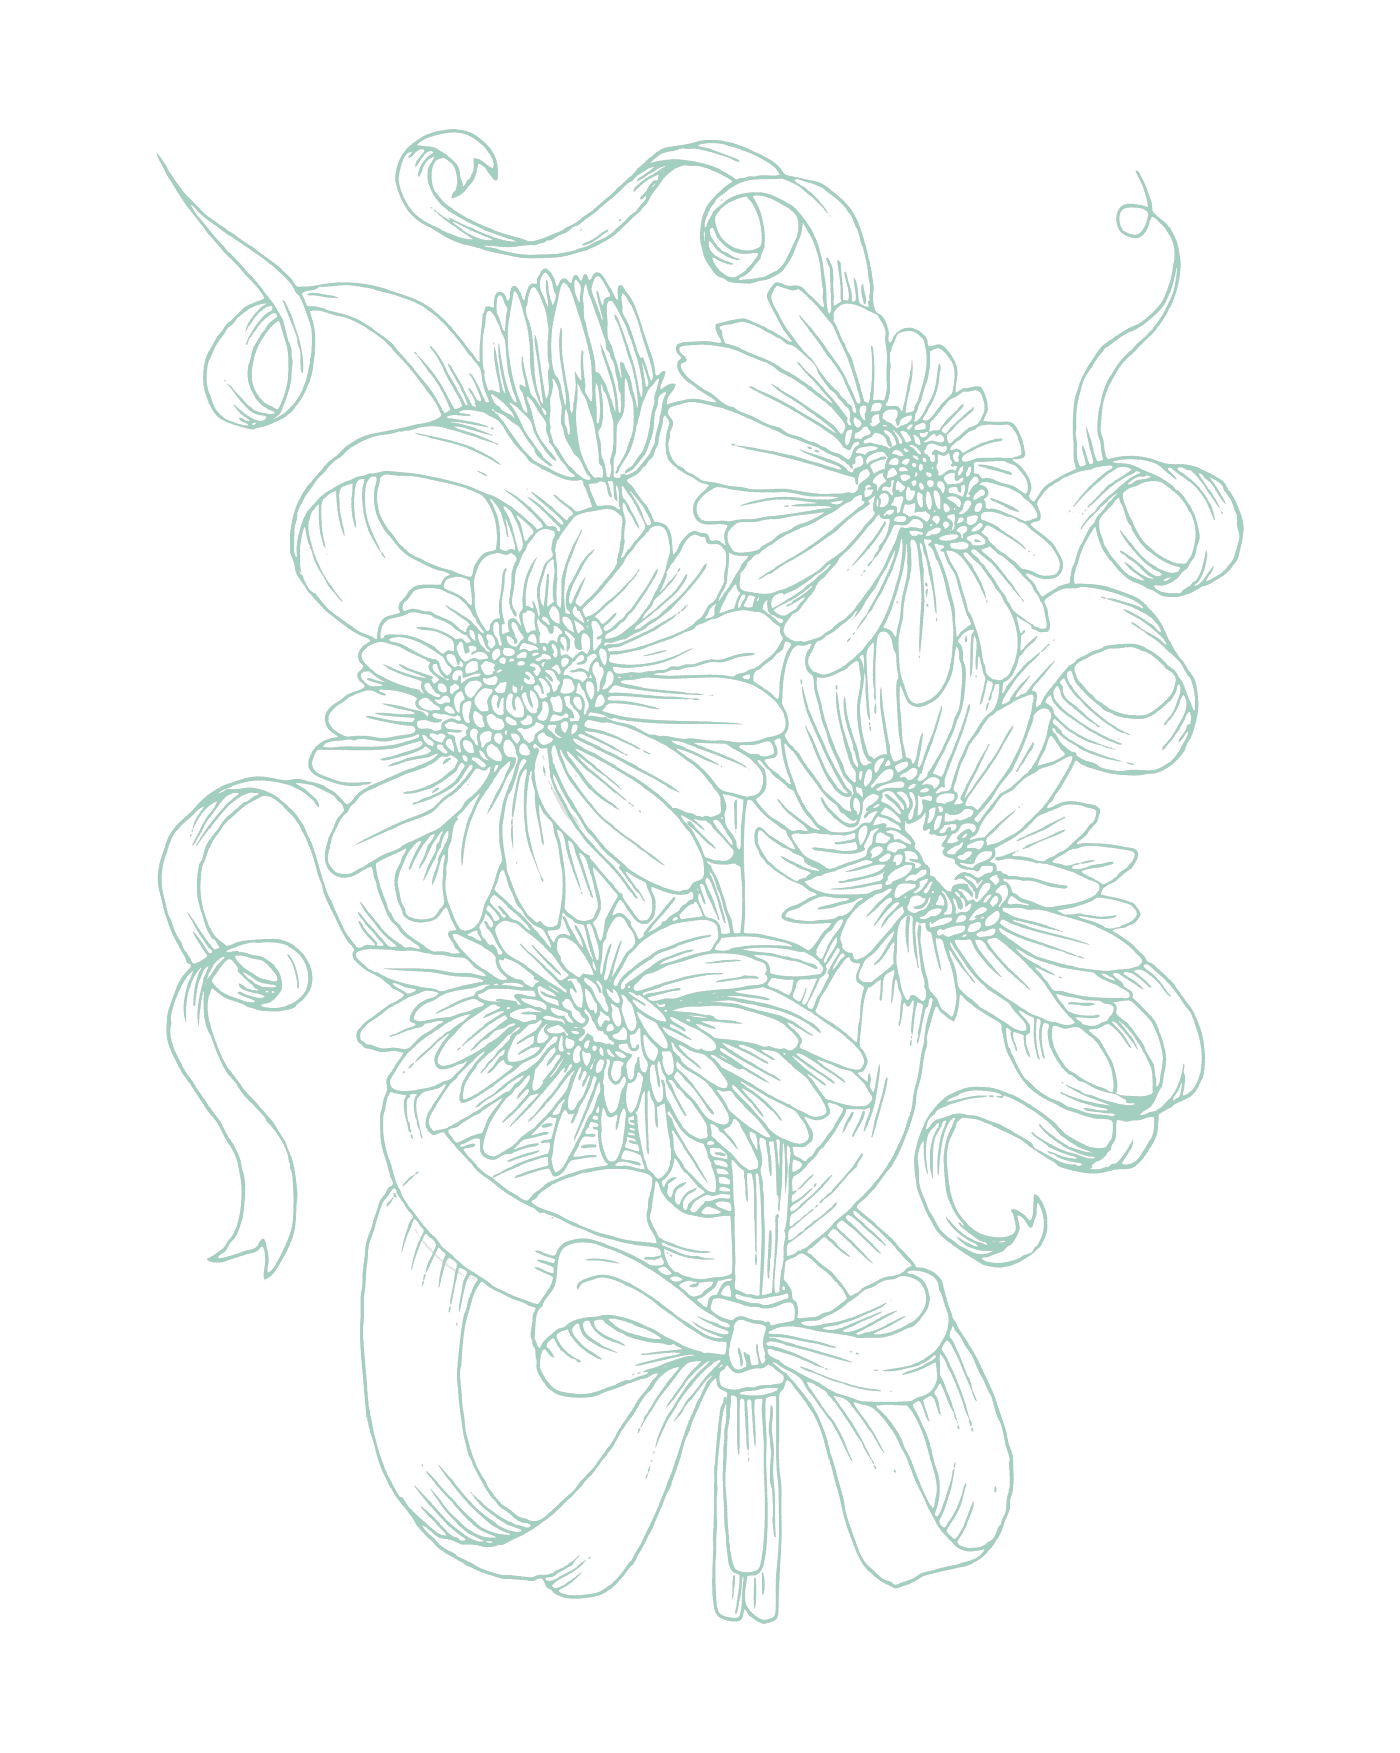  A complex and realistic bouquet of flowers in a vase 